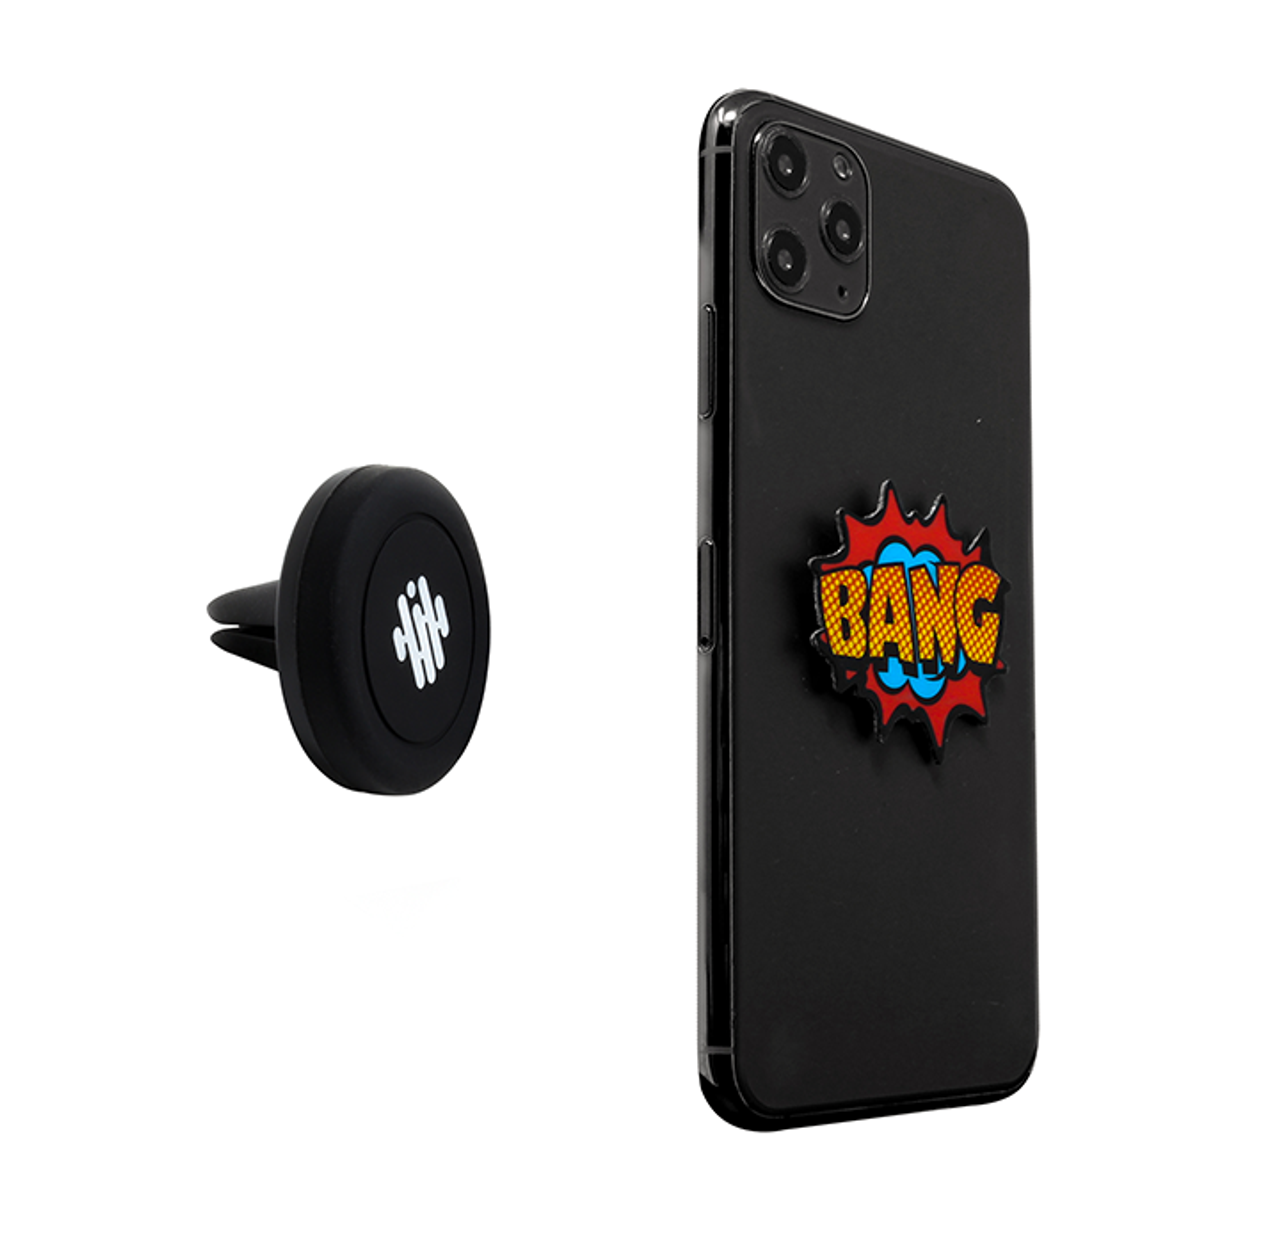 Aduro Phone Flair Designer Magnetic Vent Mount for Mobile Devices product image